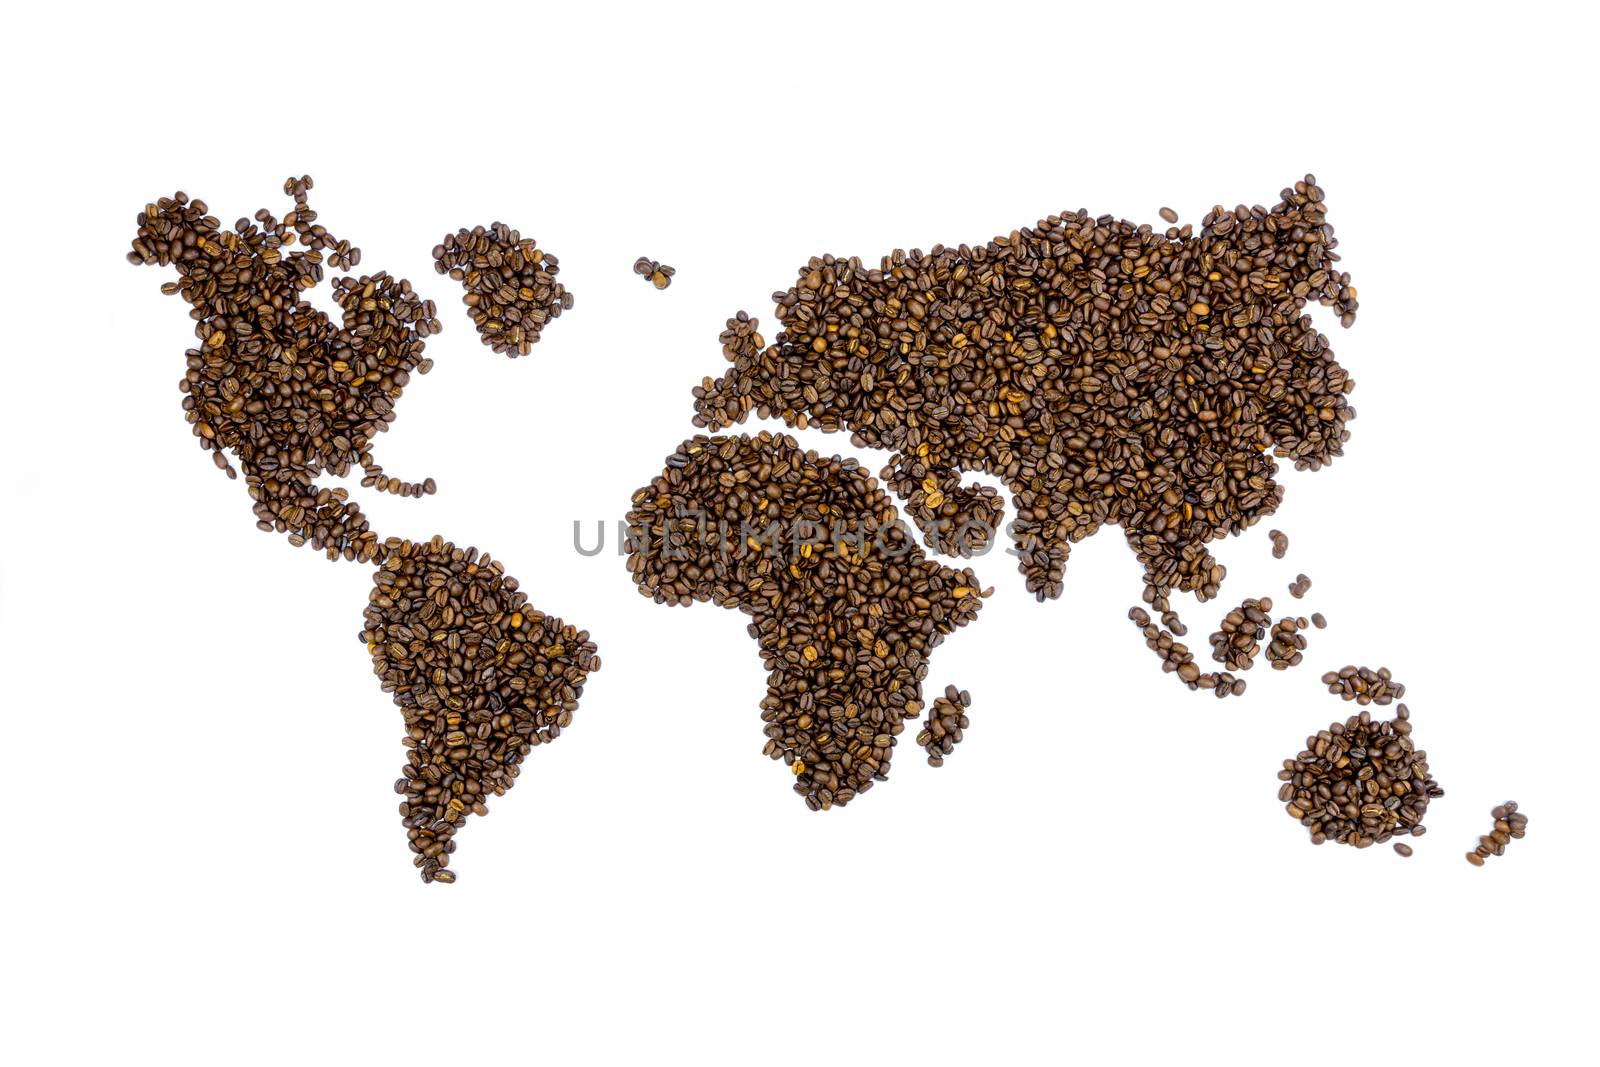 World map filled with coffee beans by BenSchonewille